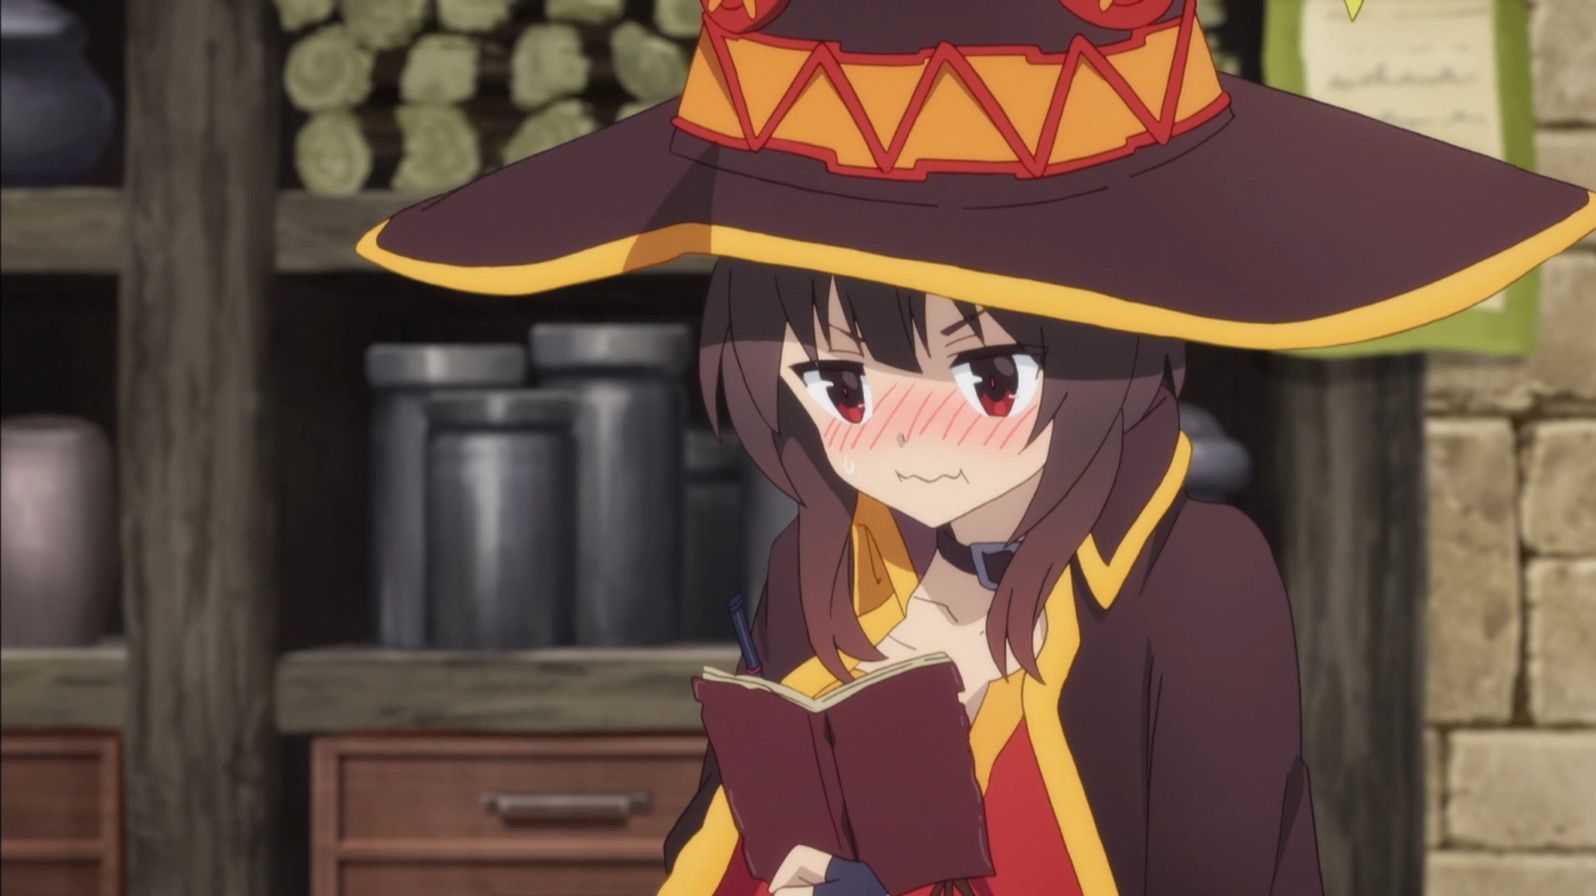 Konosuba Megumin Spinoff Anime: What to Expect Release Date